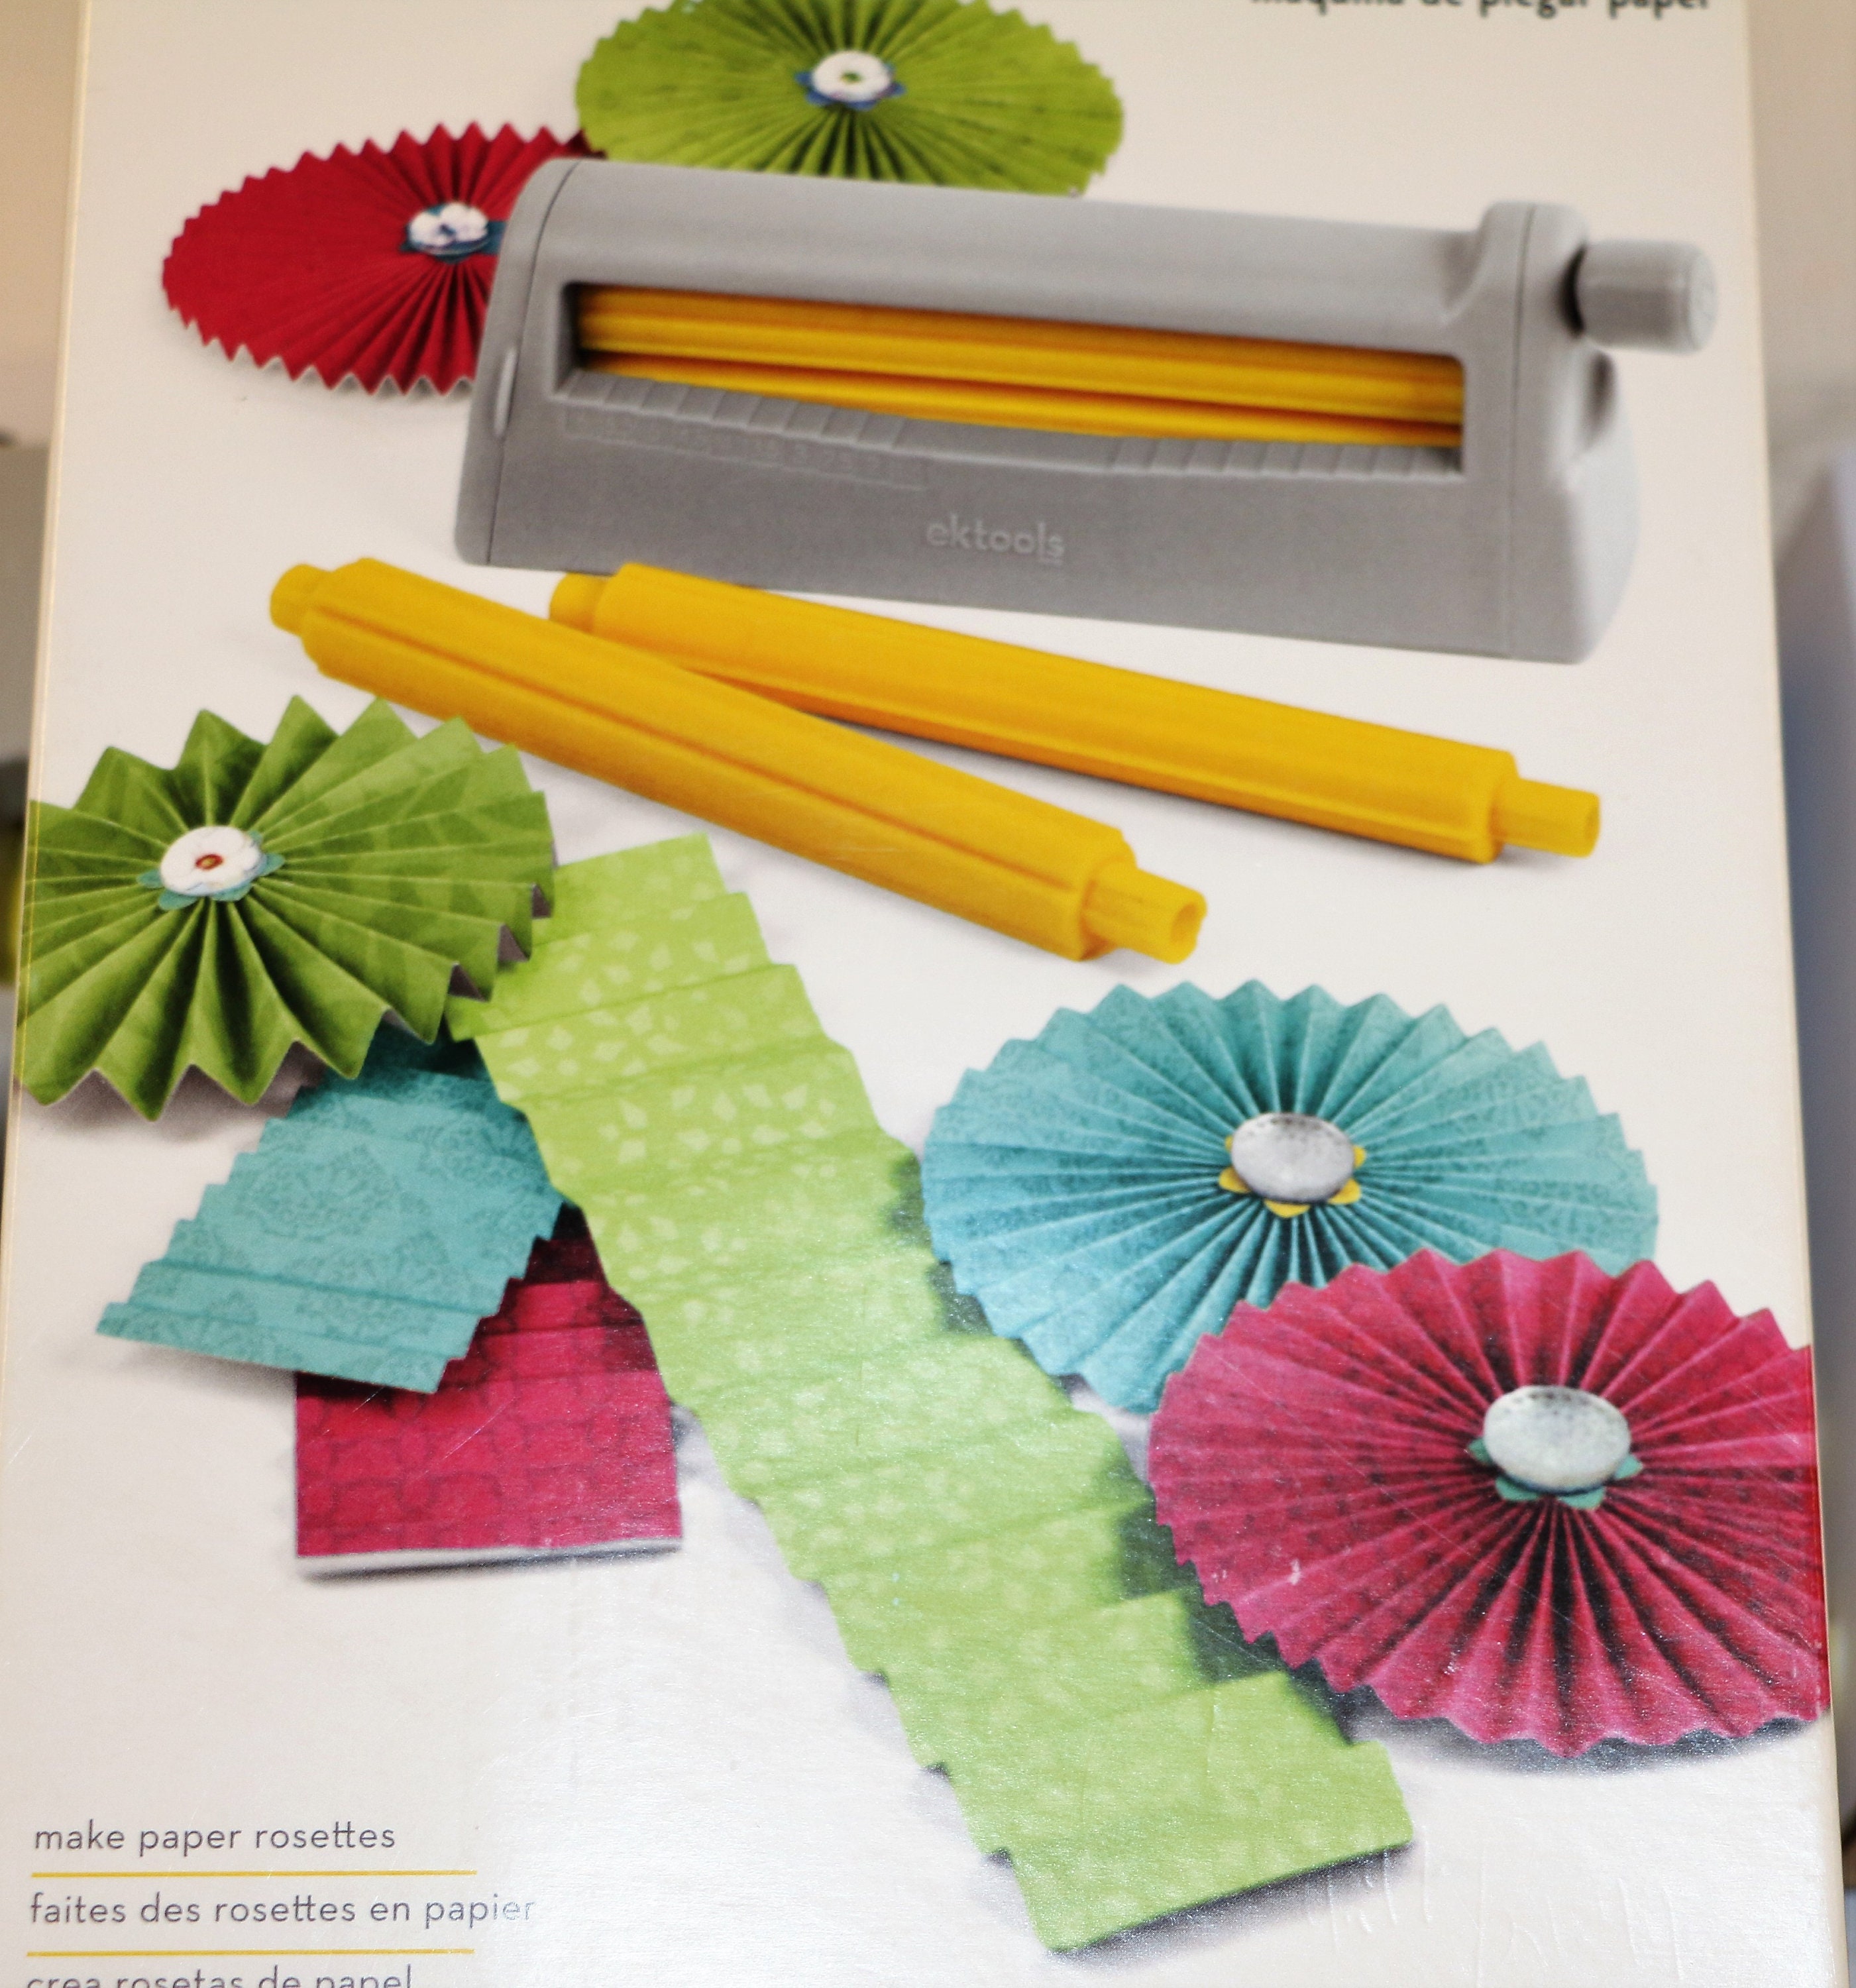 Check out our EK Tools Paper Crimper! This tools is perfect for